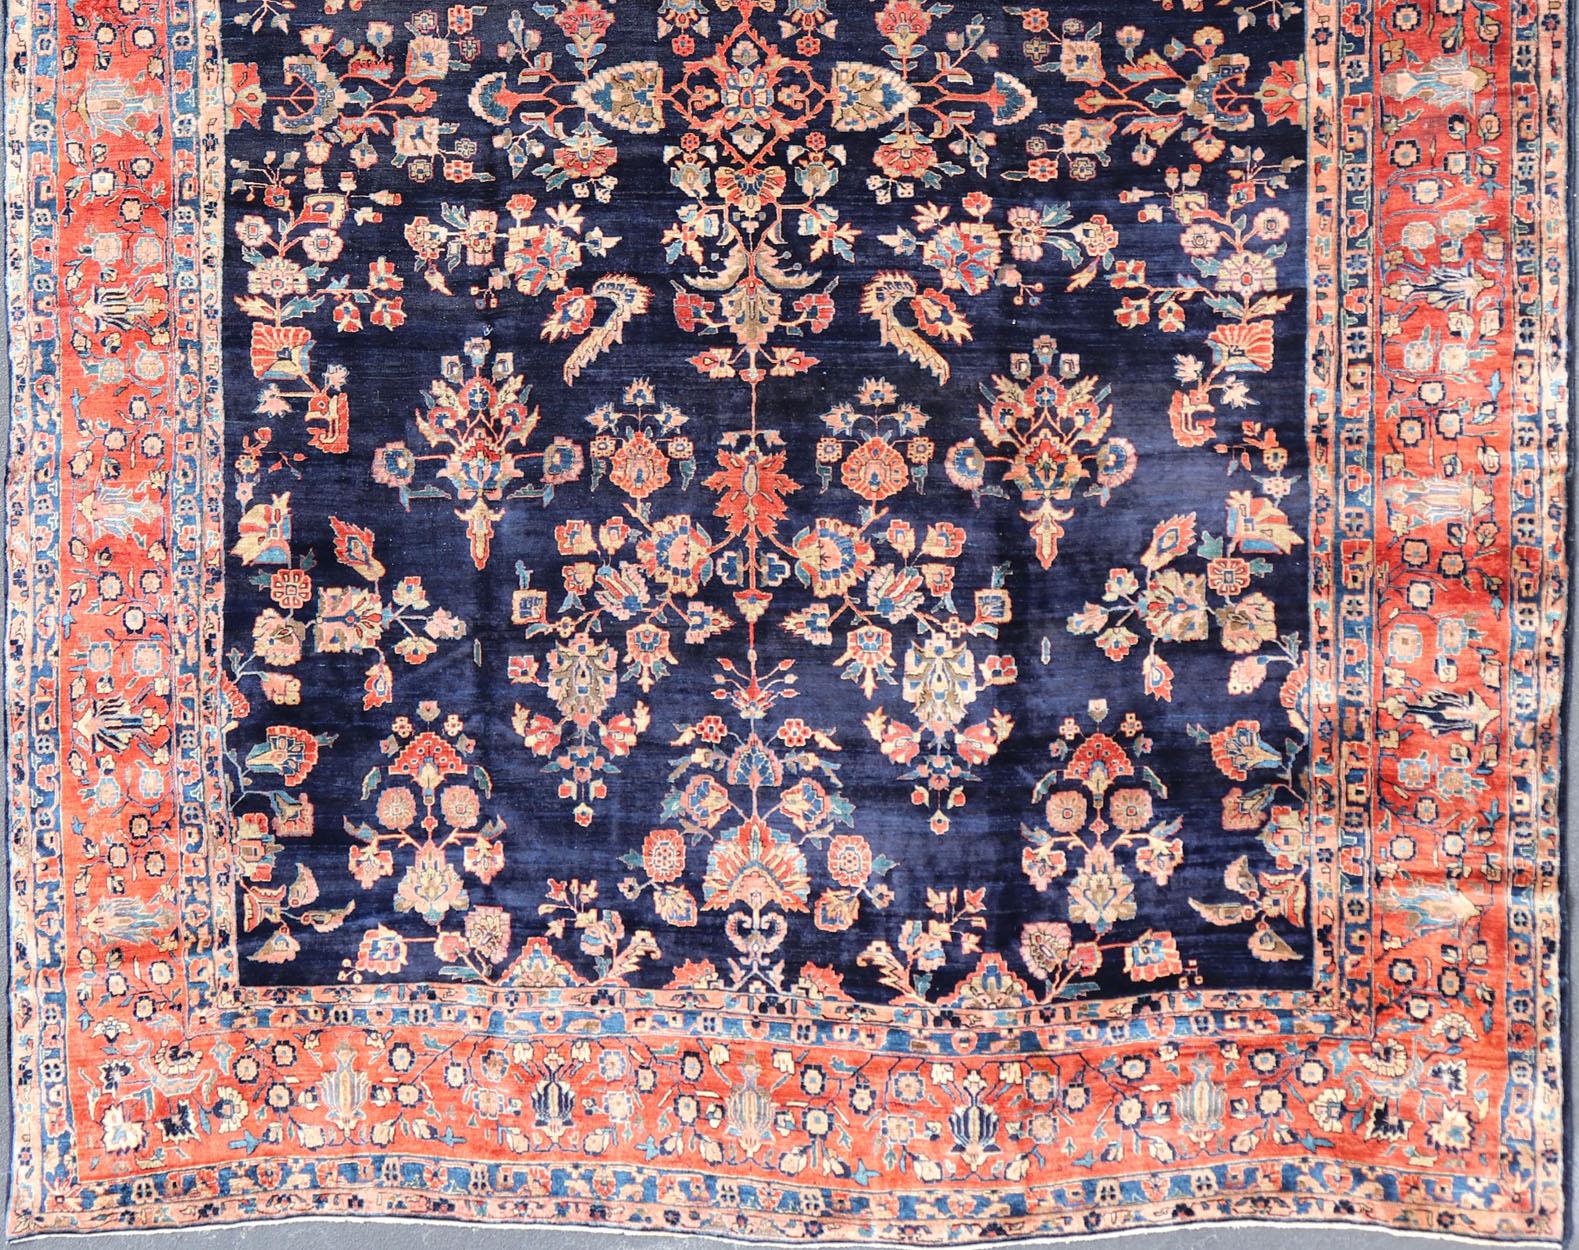 Antique Sarouk Farahan rug with all over floral design. Keivan Woven Arts /  rug R20-0835, country of origin / type: Iran / Sarouk Farahan, circa 1910's, 
Measures: 12'1 x 15'8.
This outstanding large antique Sarouk, very finely woven carpet, is